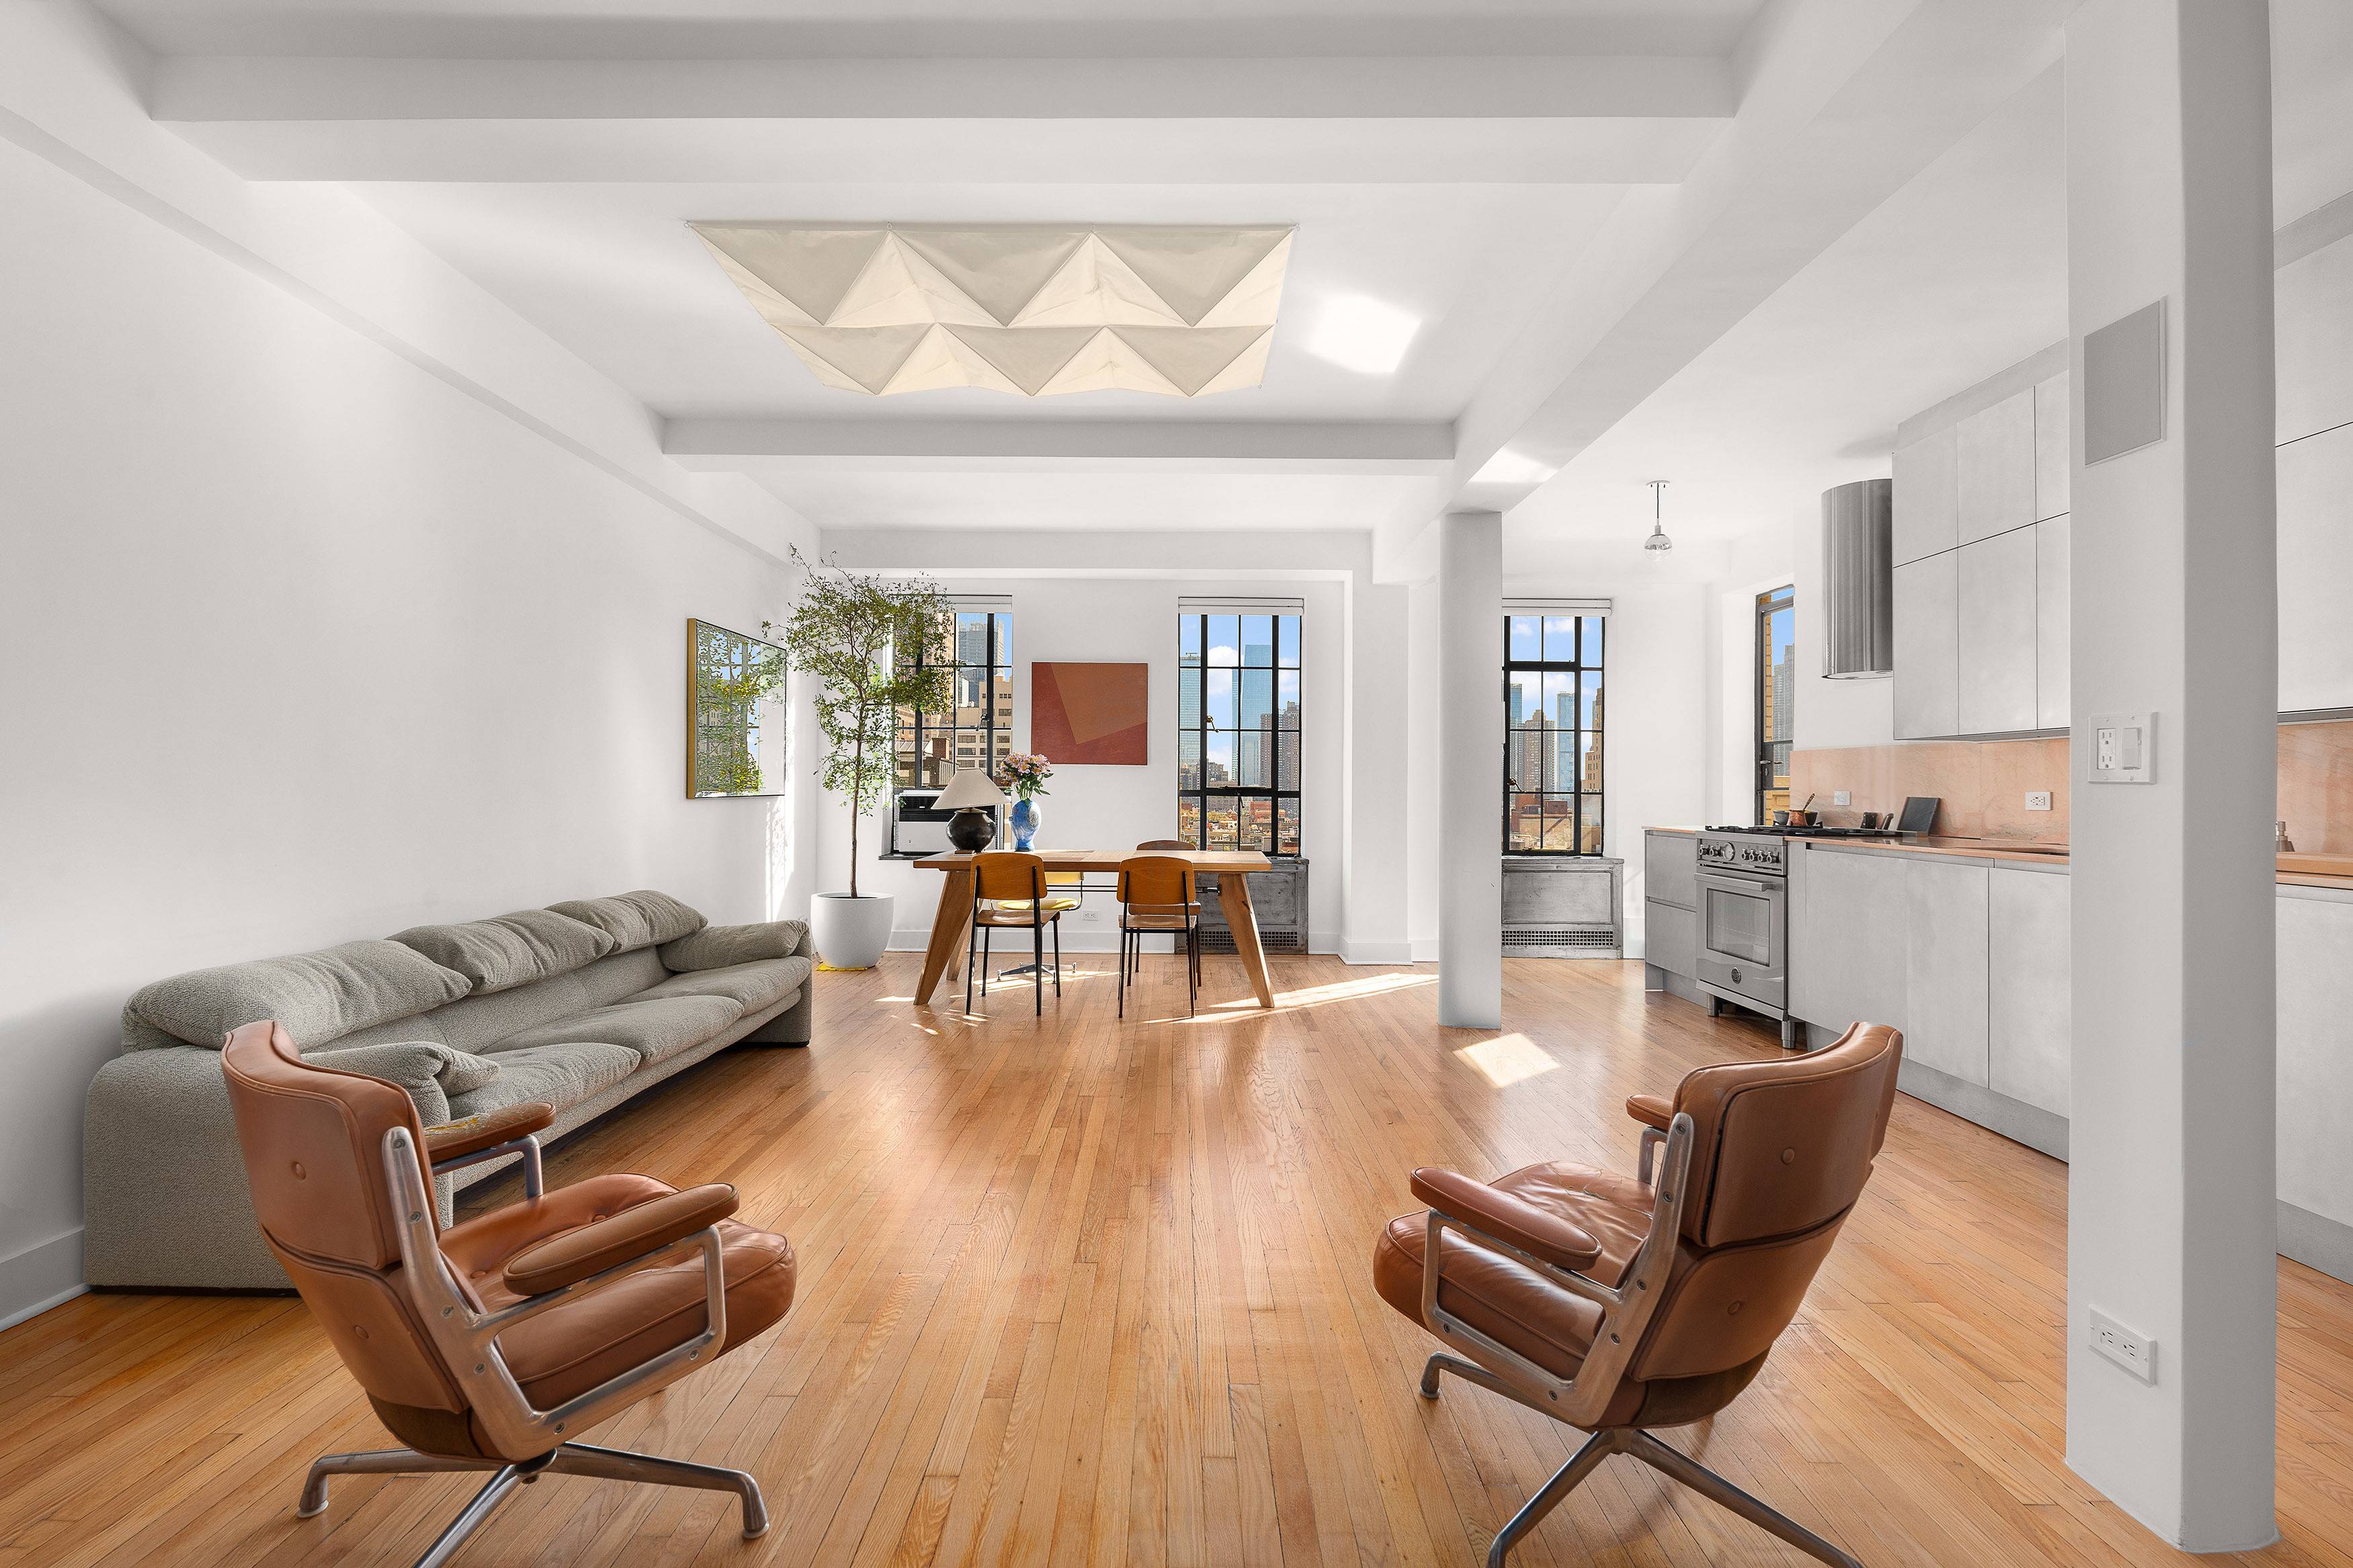 CALLING ALL TERRACE LOVERS Bathed in natural light, this stunningly renovated 1, 086 Sq Ft, 1 bedroom residence is situated within a pristine 1931 full service condominium off Columbus Circle.